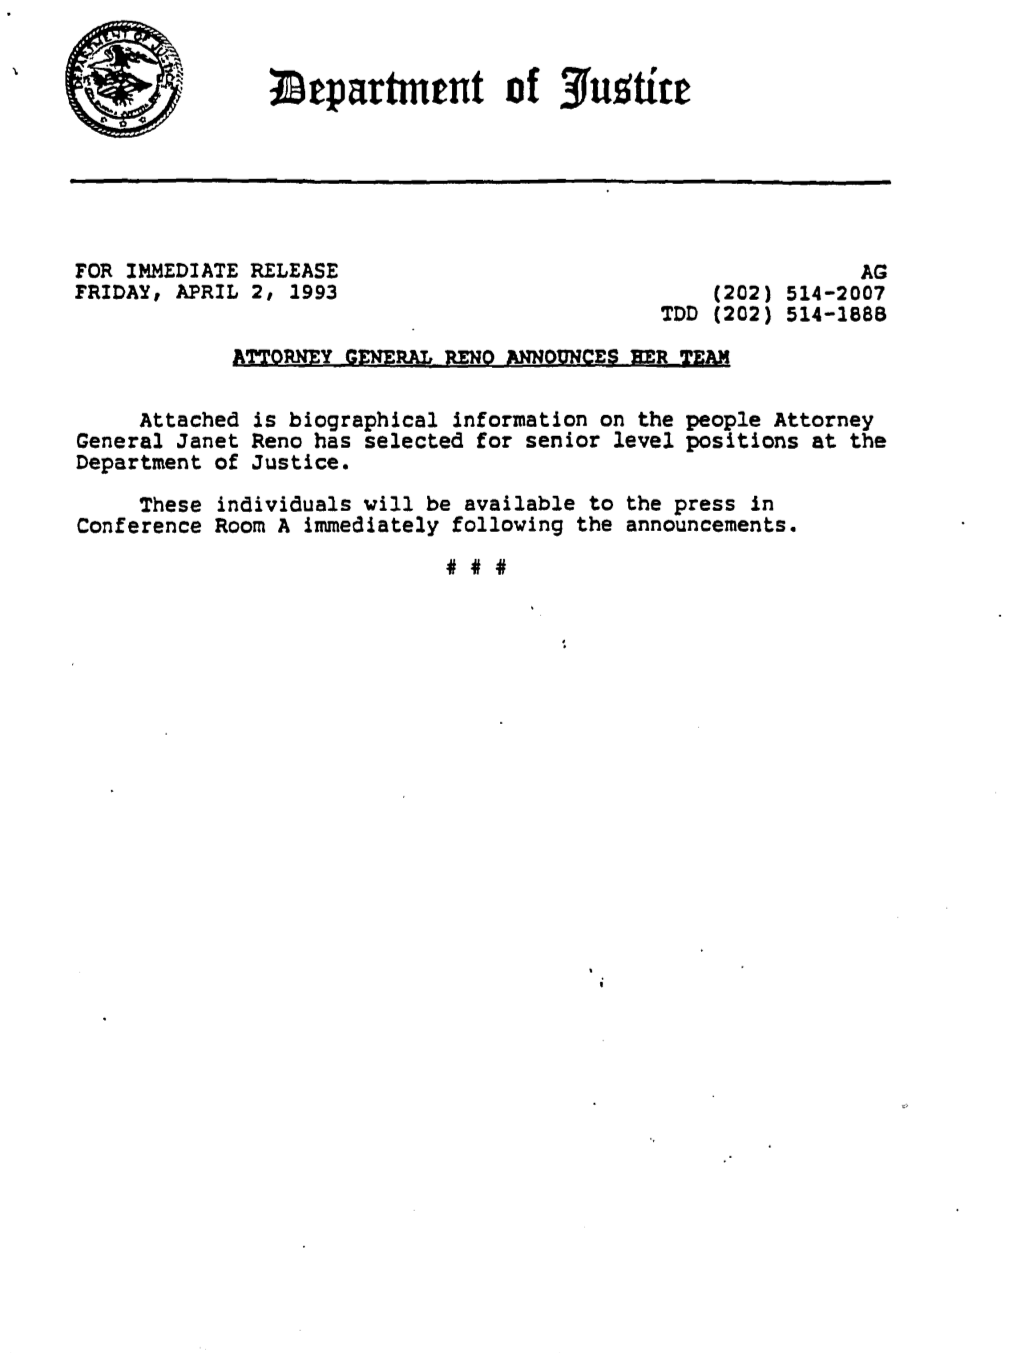 Attorney General Reno Announce Her Team, Friday, April 2, 1993